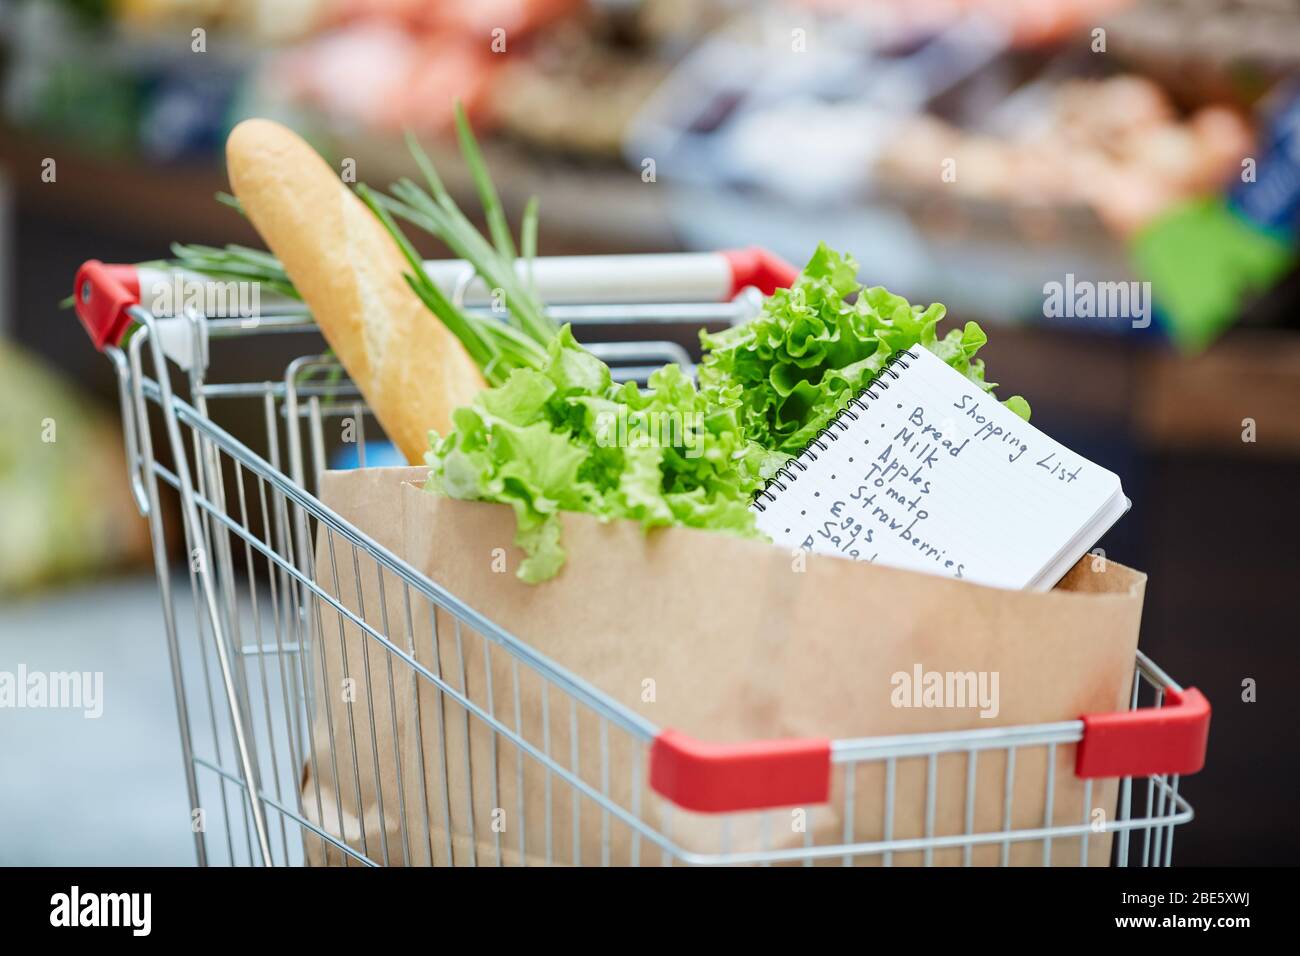 Background image of shopping cart with fresh groceries, focus on shopping list in paper bag, copy space Stock Photo